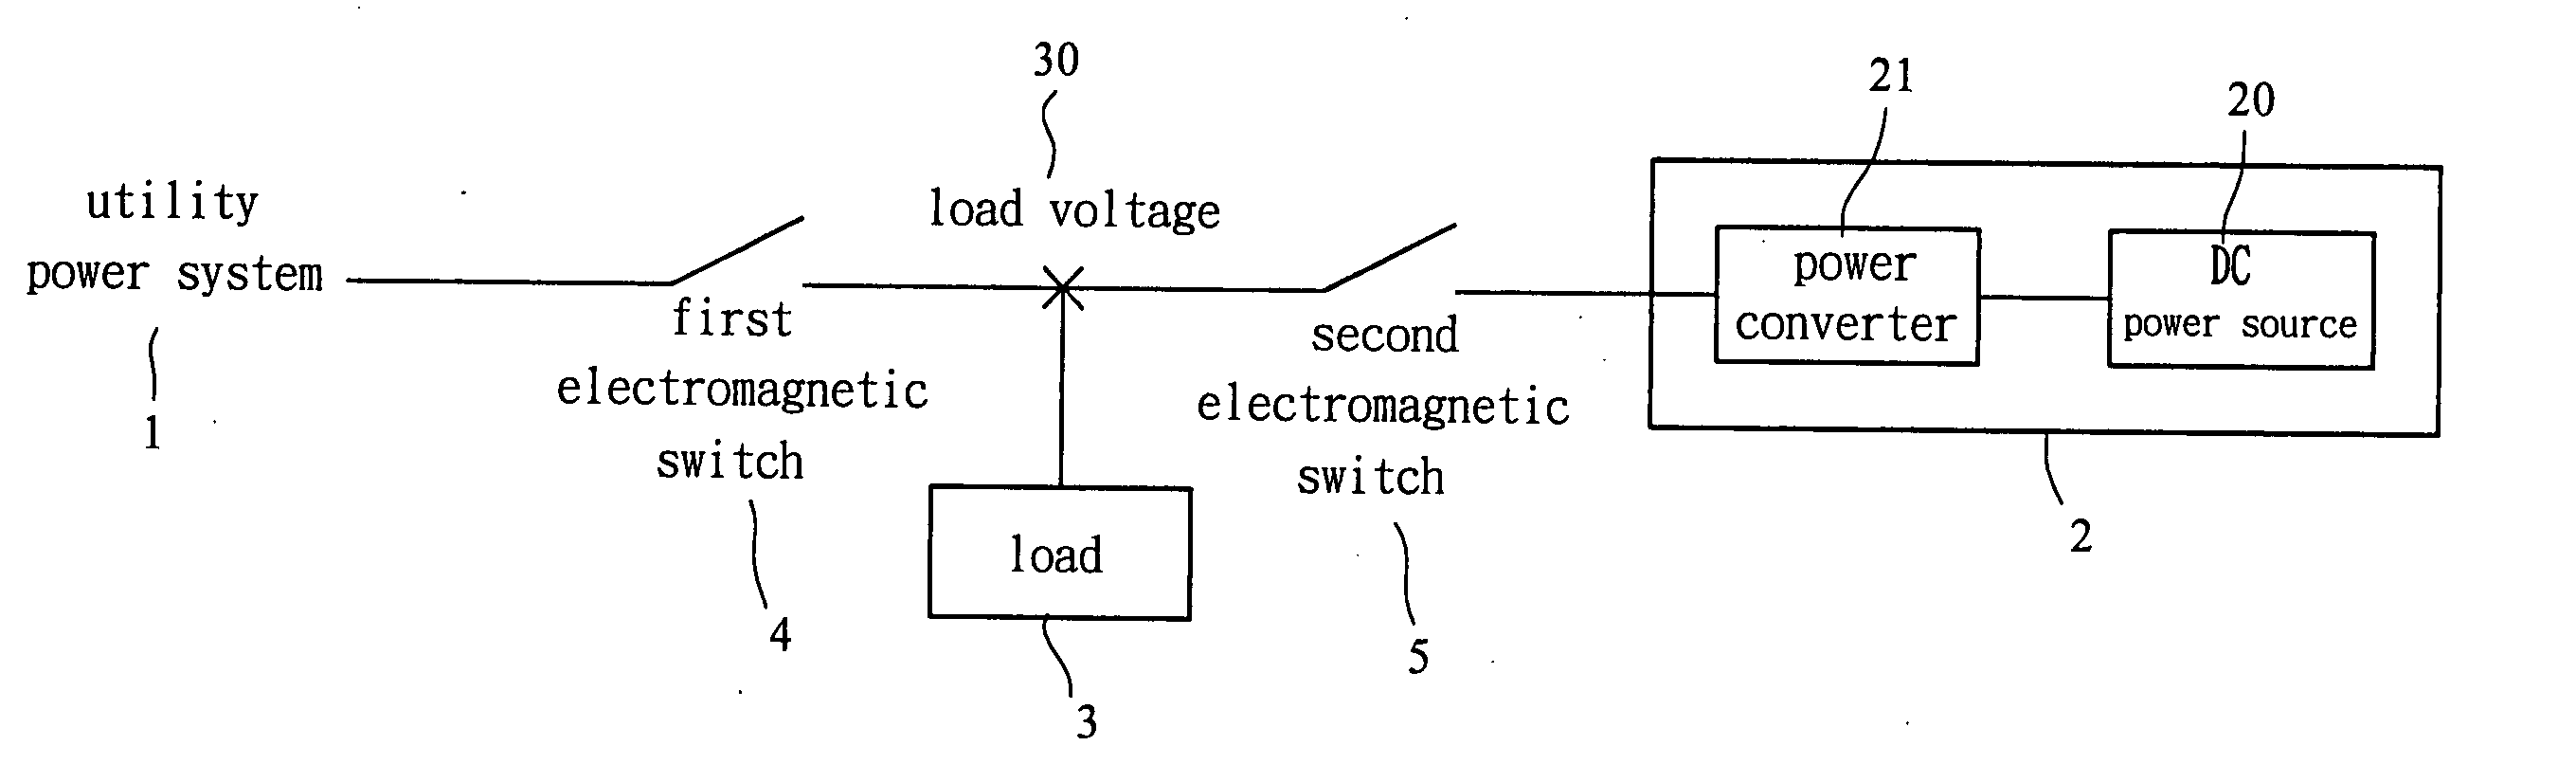 Islanding detection apparatus for a distributed generation power system and detection method therefor